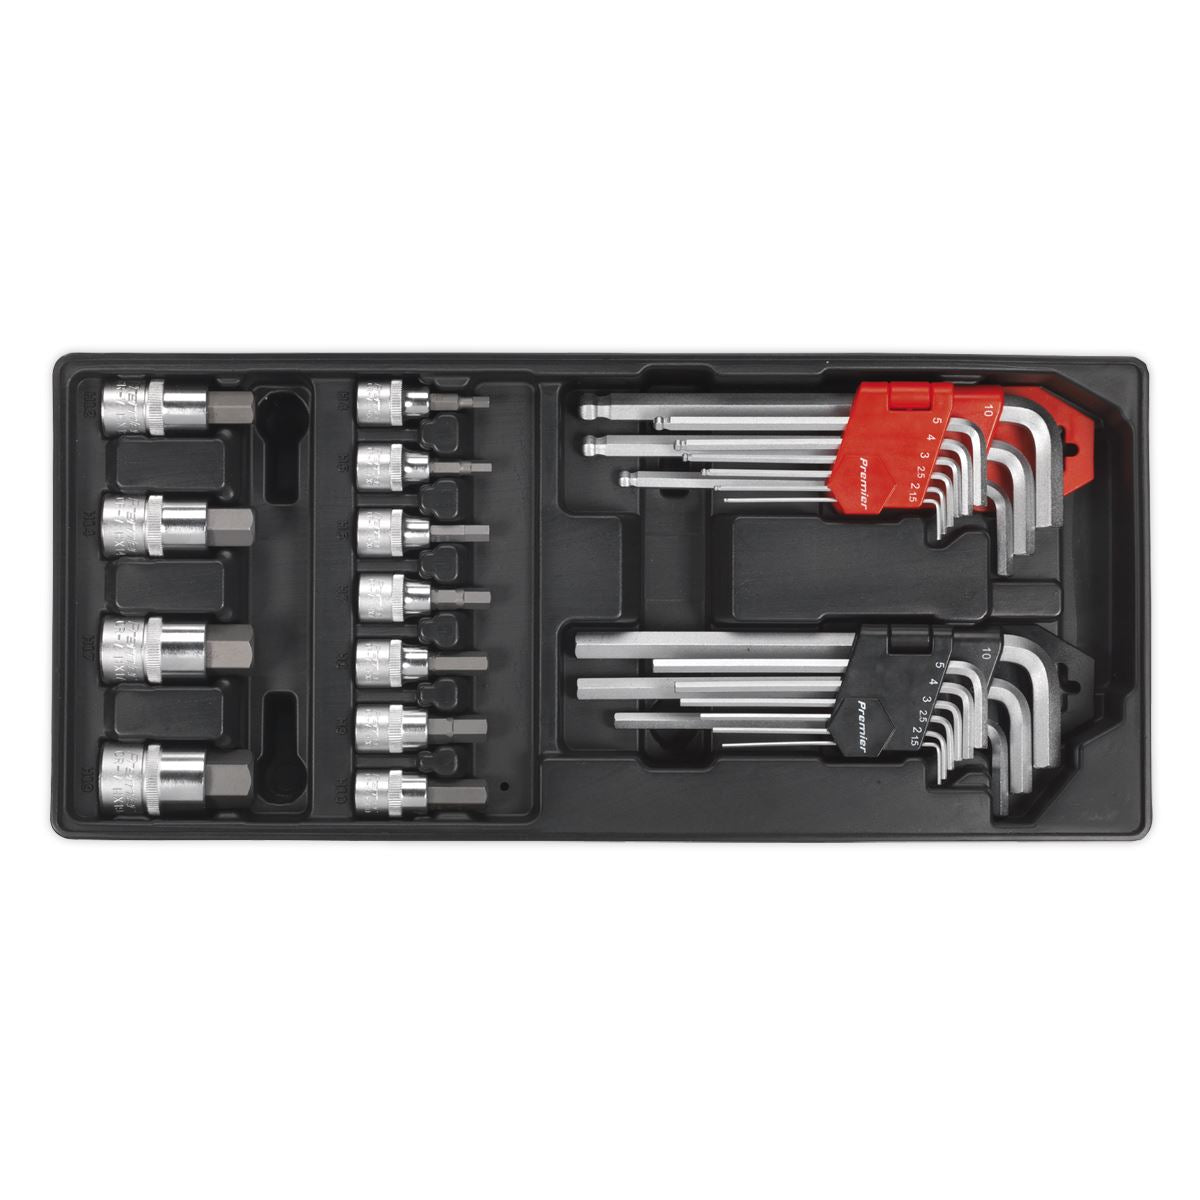 Sealey Premier Tool Tray with Hex/Ball-End Hex Keys & Socket Bit Set 29pc